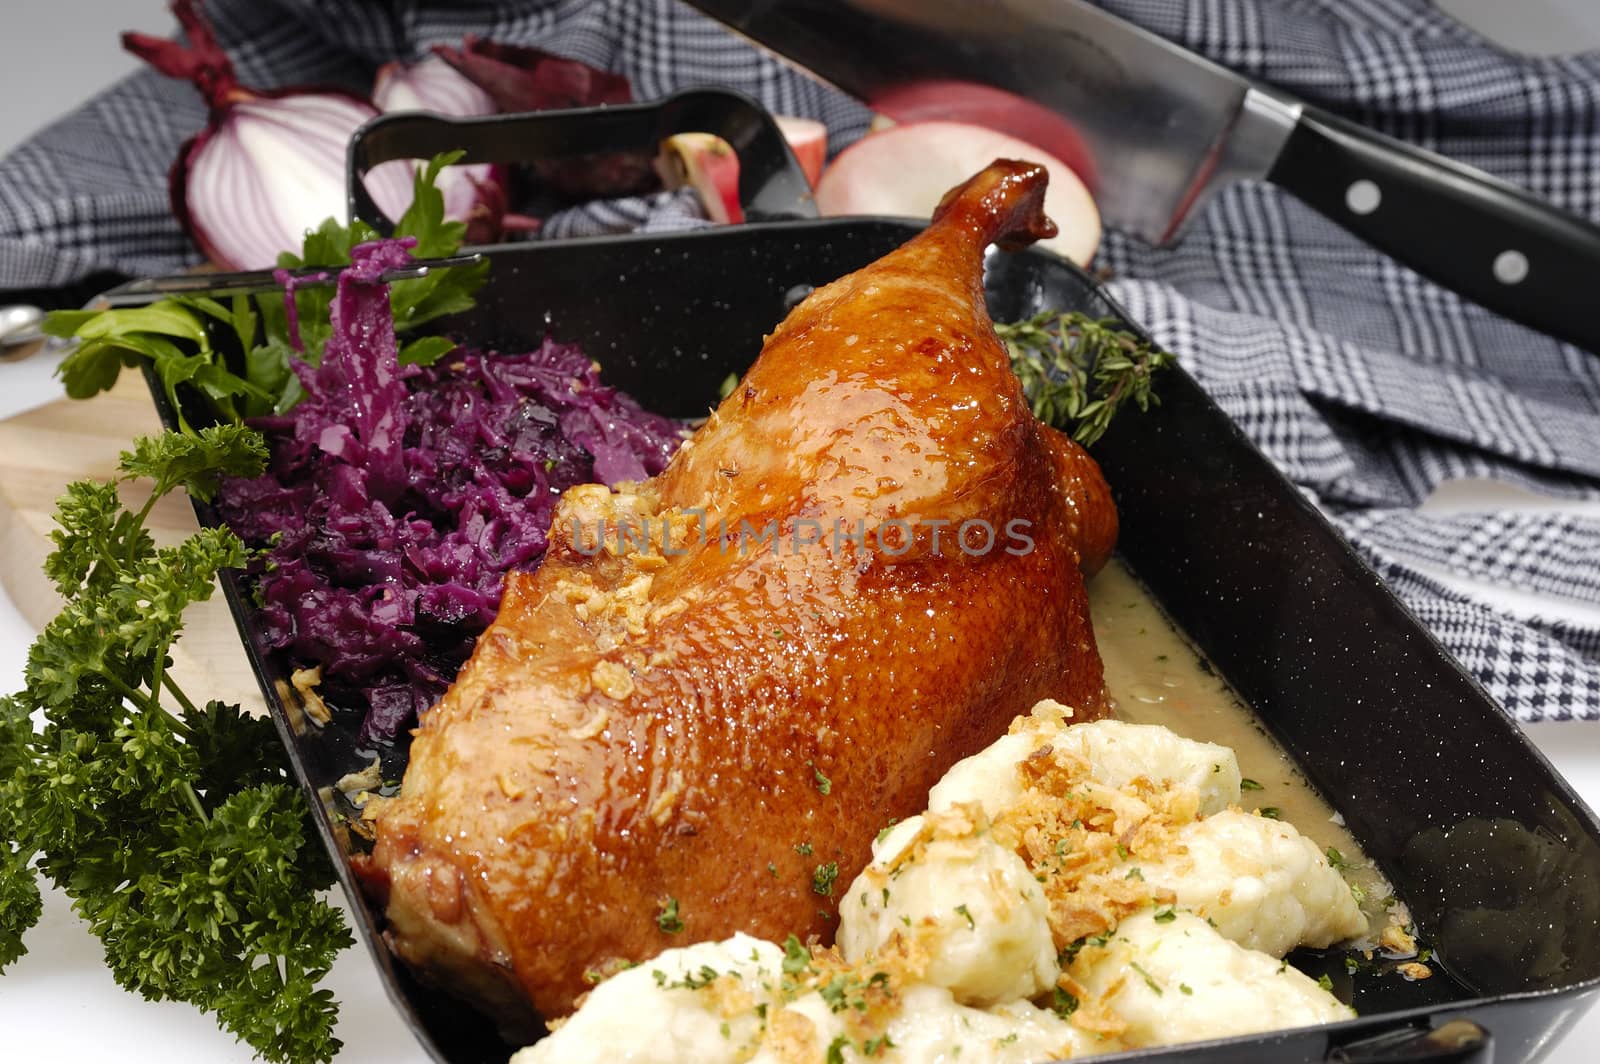 Baked duck with red cabbage and dumplings